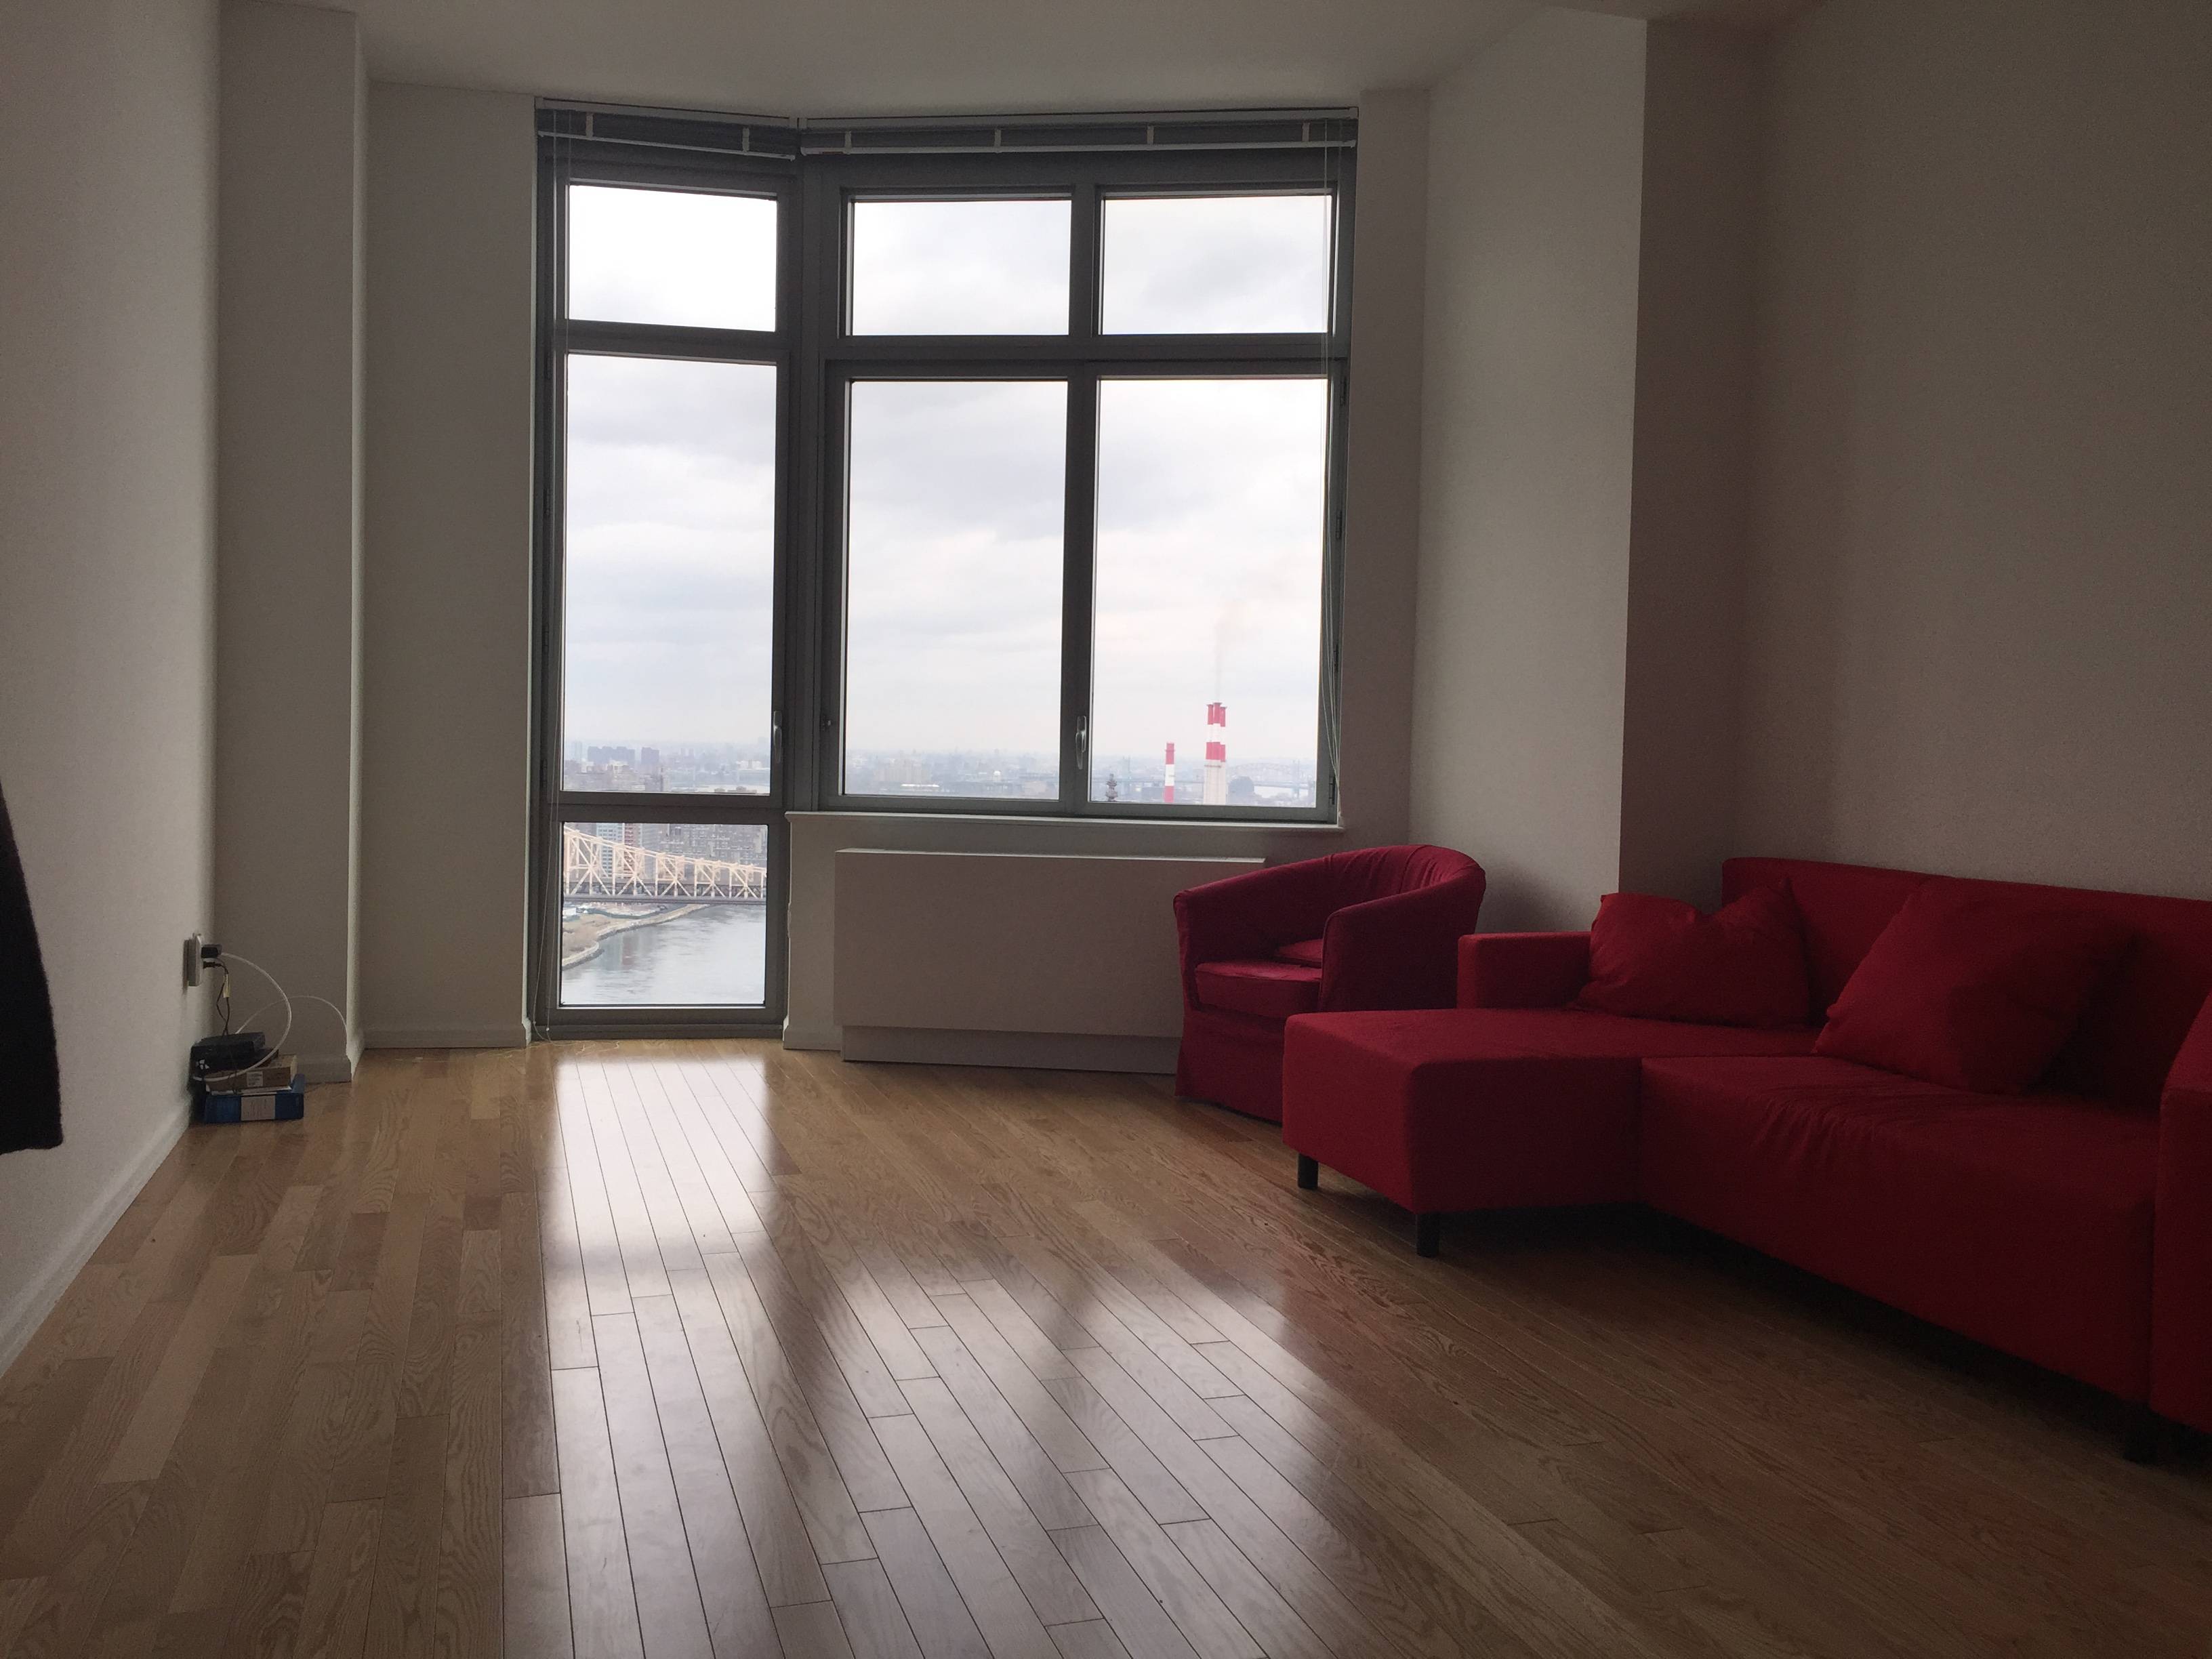 NO FEE-Penthouse 41 st Floor~ LARGE STUDIO~NO FEE~LONG ISLAND CITY~7STAR LUXURY ~Top of the line Amenities-646-483-9492